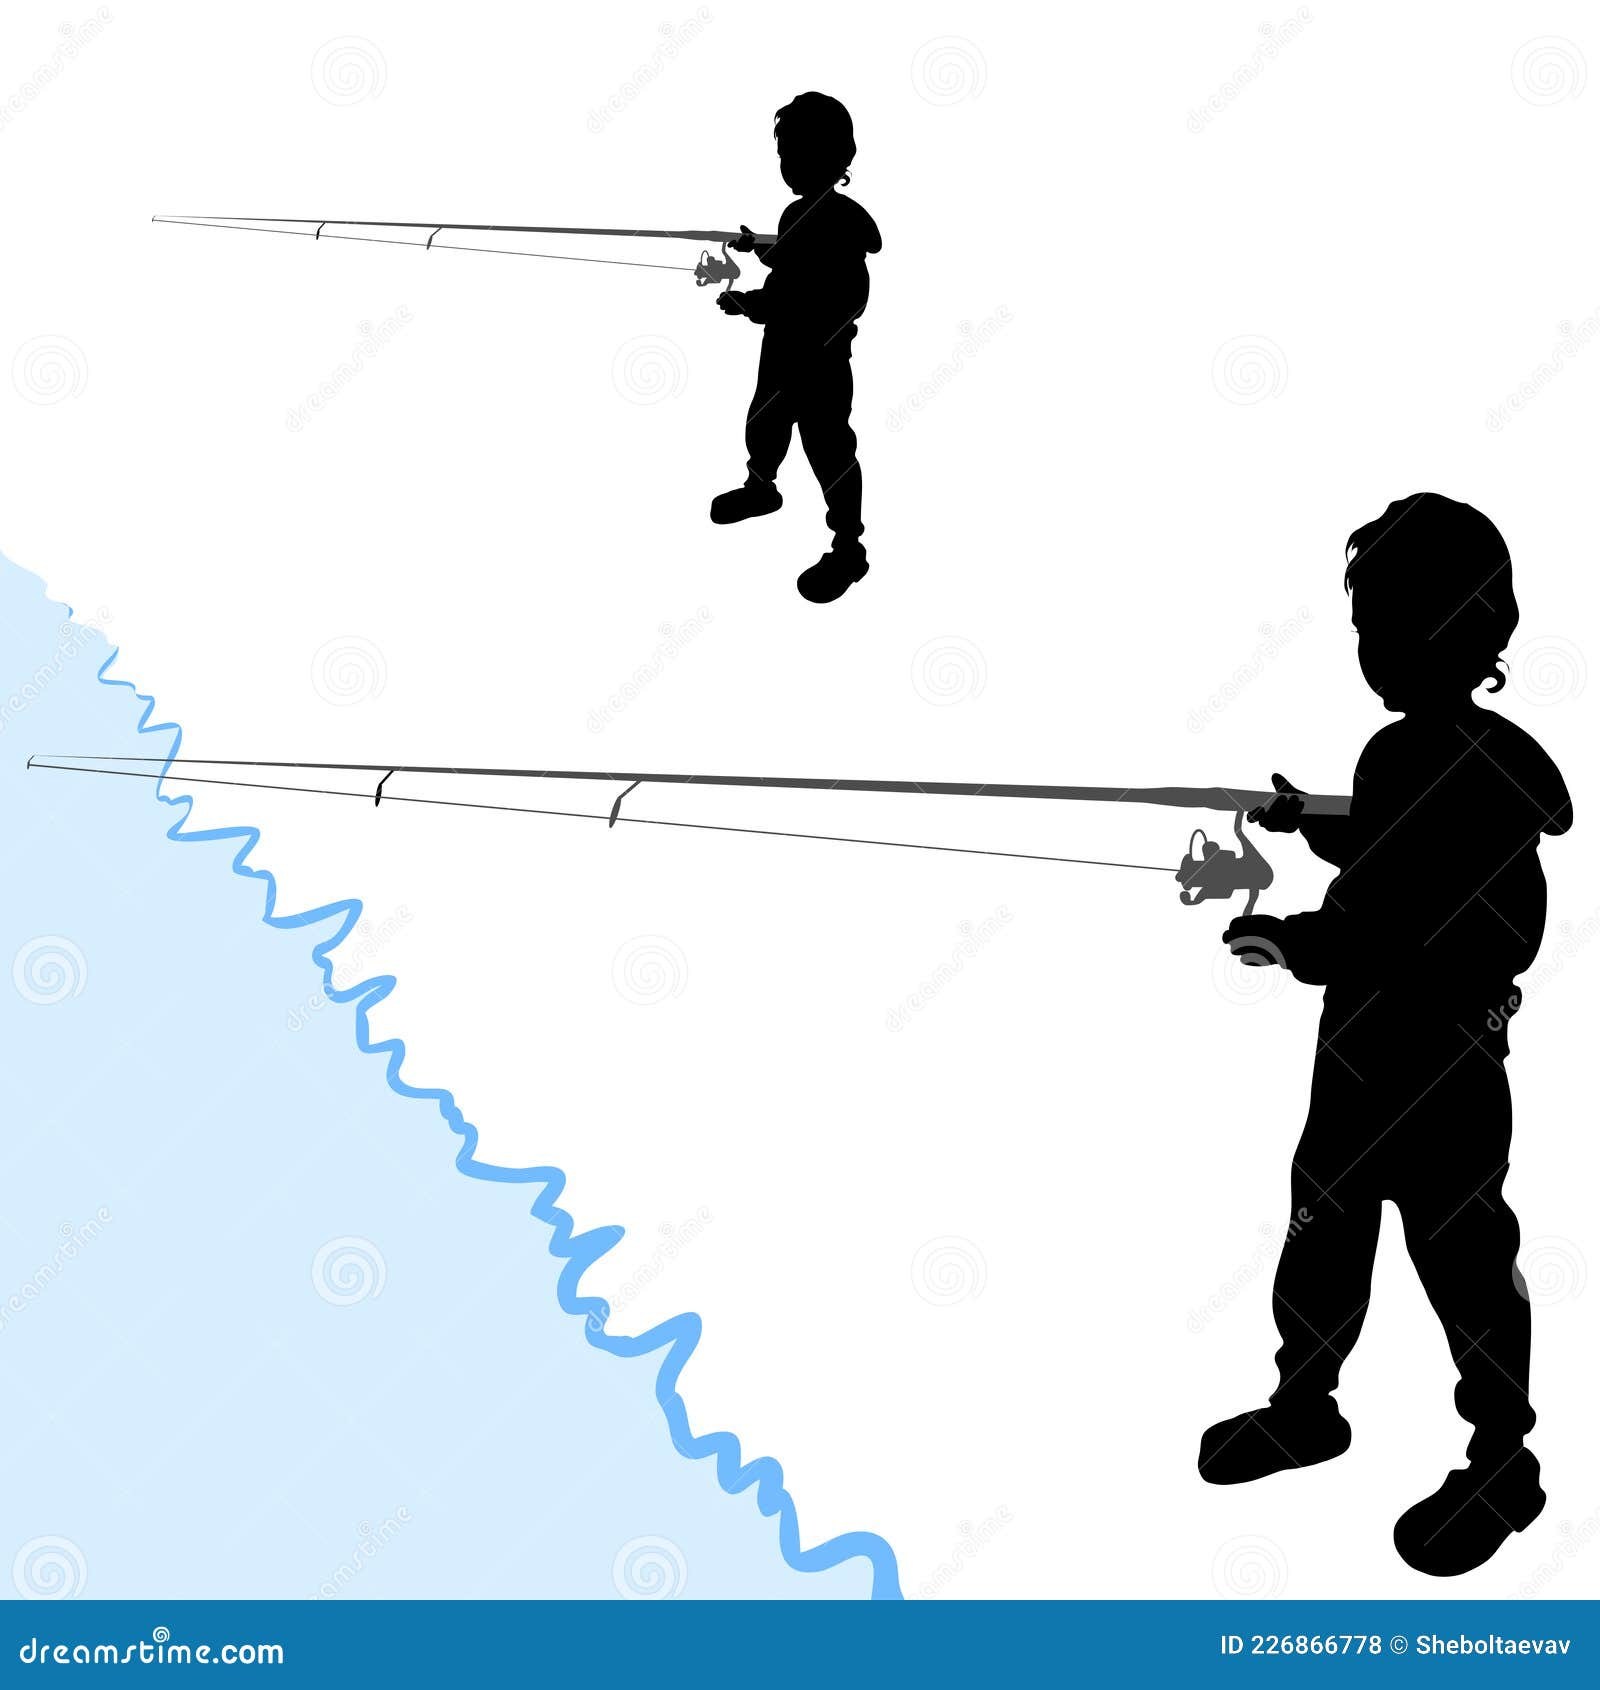 https://thumbs.dreamstime.com/z/vector-silhouette-child-little-year-old-fishing-boy-spinning-rod-stands-shore-pond-isolated-white-226866778.jpg